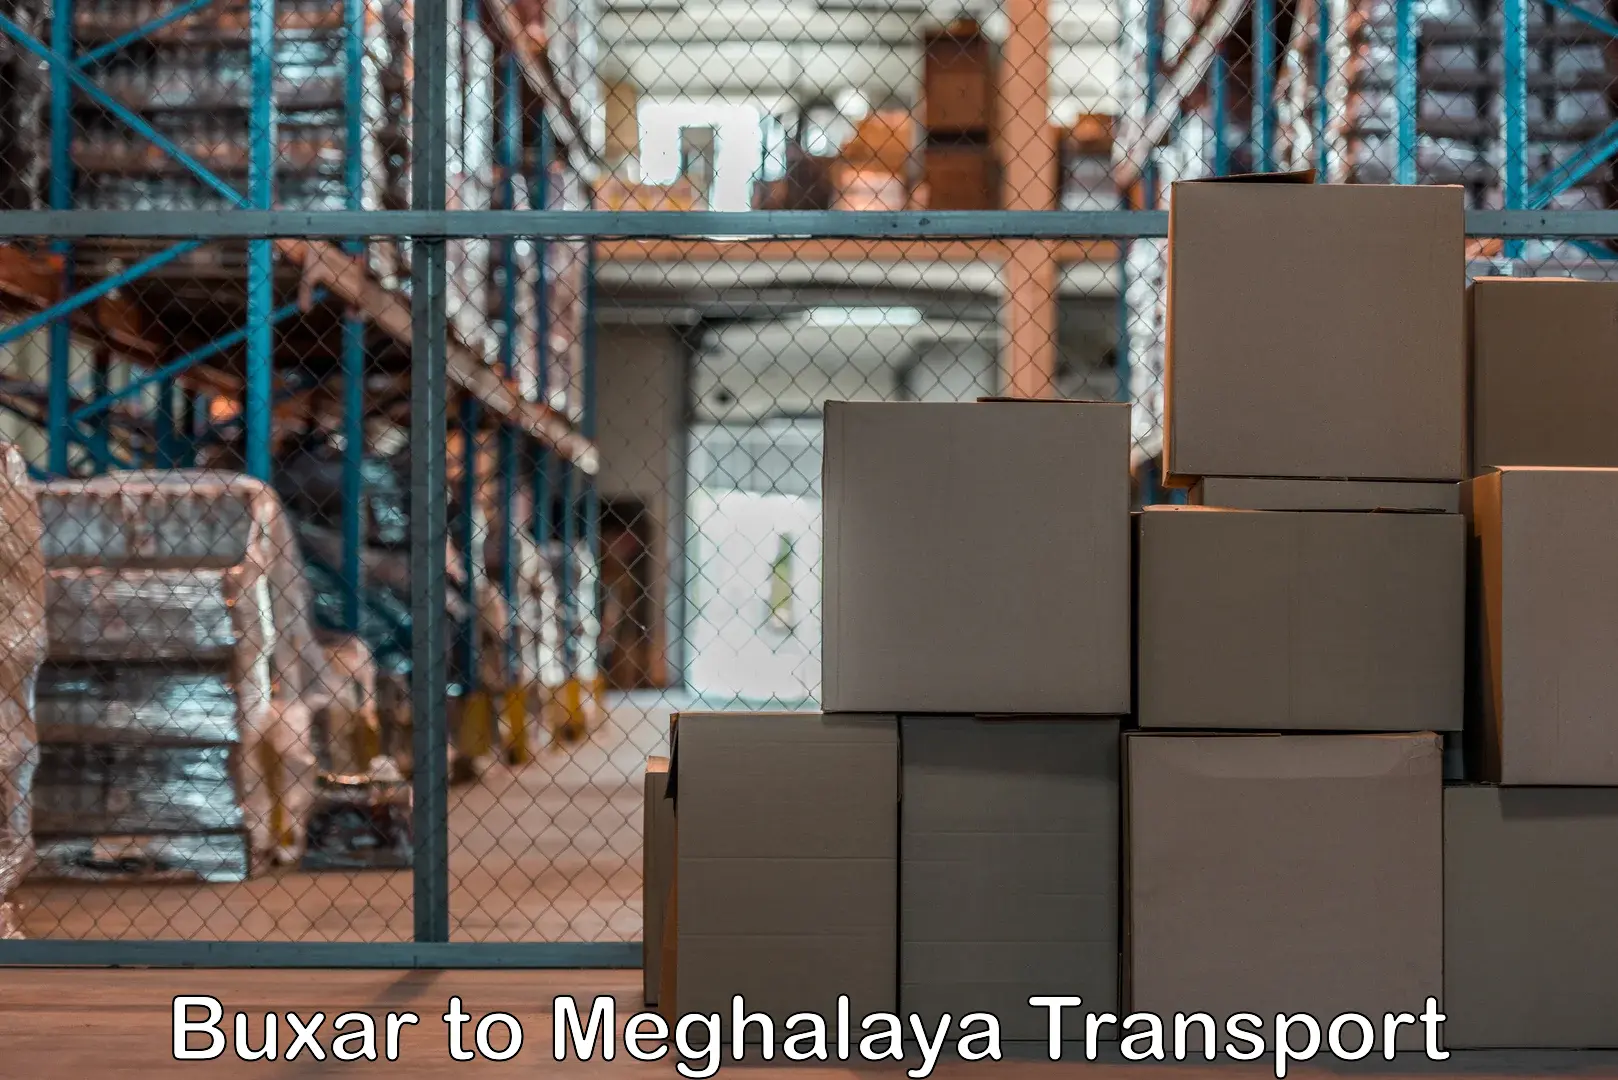 Air cargo transport services in Buxar to Dkhiah West